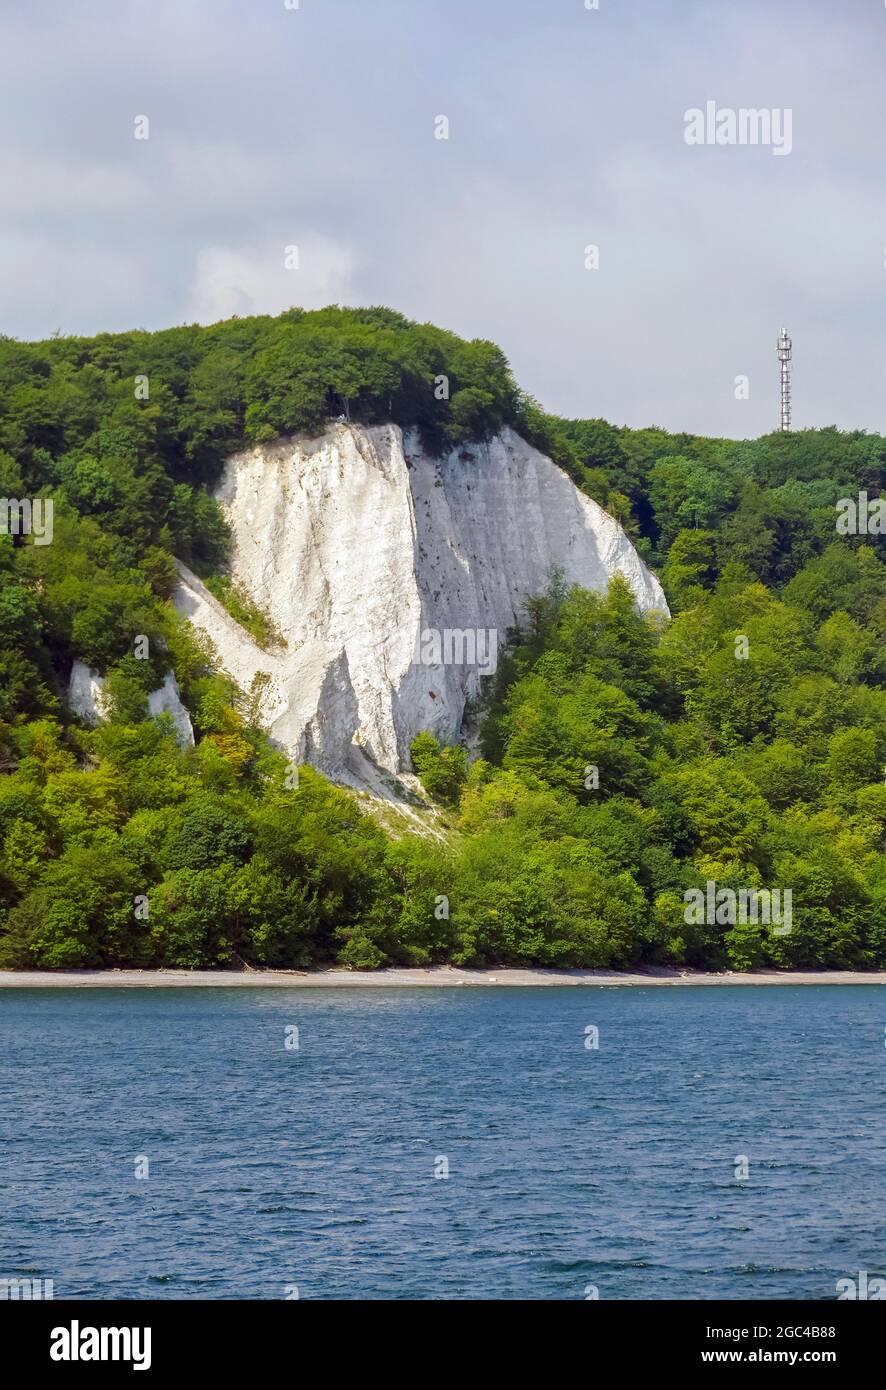 Sunny scenery around the chalk cliffs at island of Ruegen in Germany Stock Photo